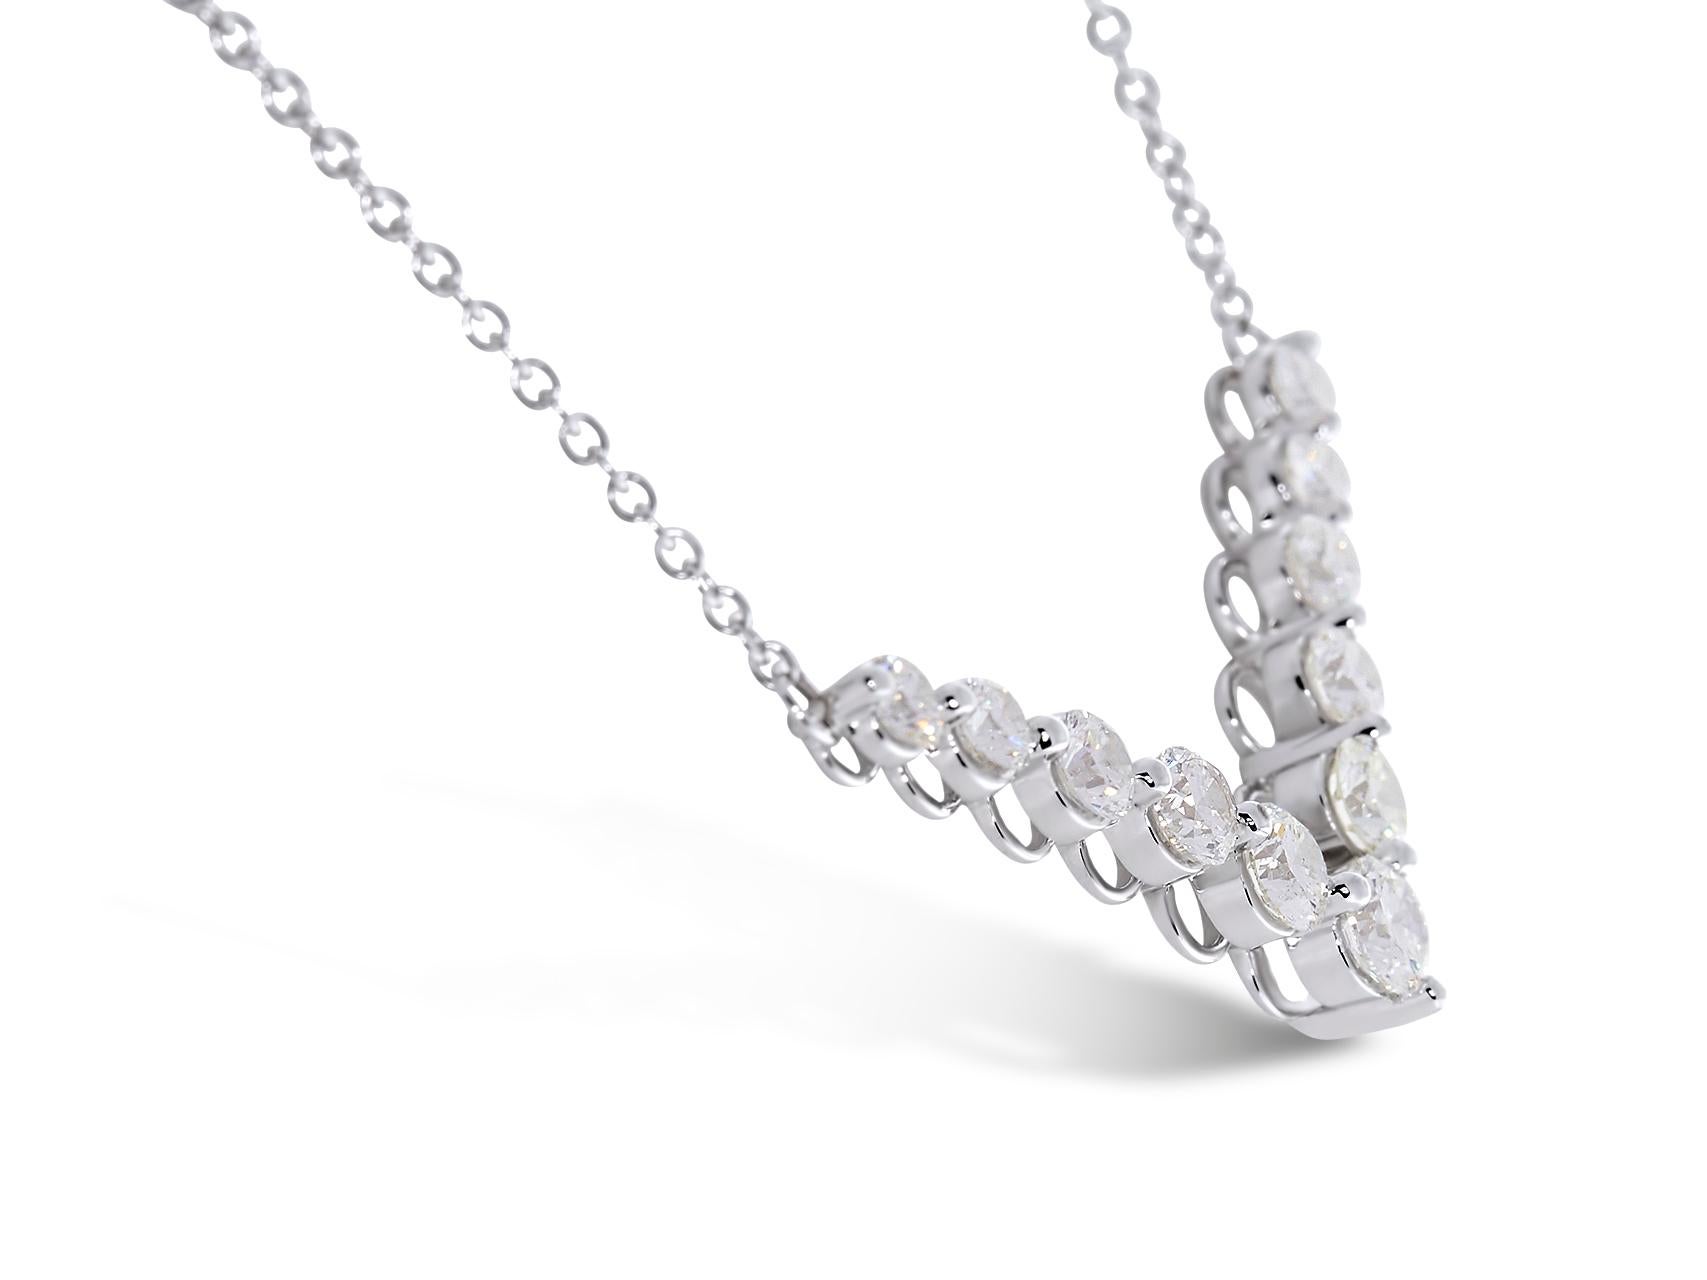 Modern 1.20 Carat Round Diamond Chevron Necklace in 14 Karat White Gold. Certified by IGI Laboratory in New York, with full diamond jewelry grading report.

1.20 Carats of Brilliant Round White VS-SI Diamonds
and 4.00 grams of 14K White Gold.

This